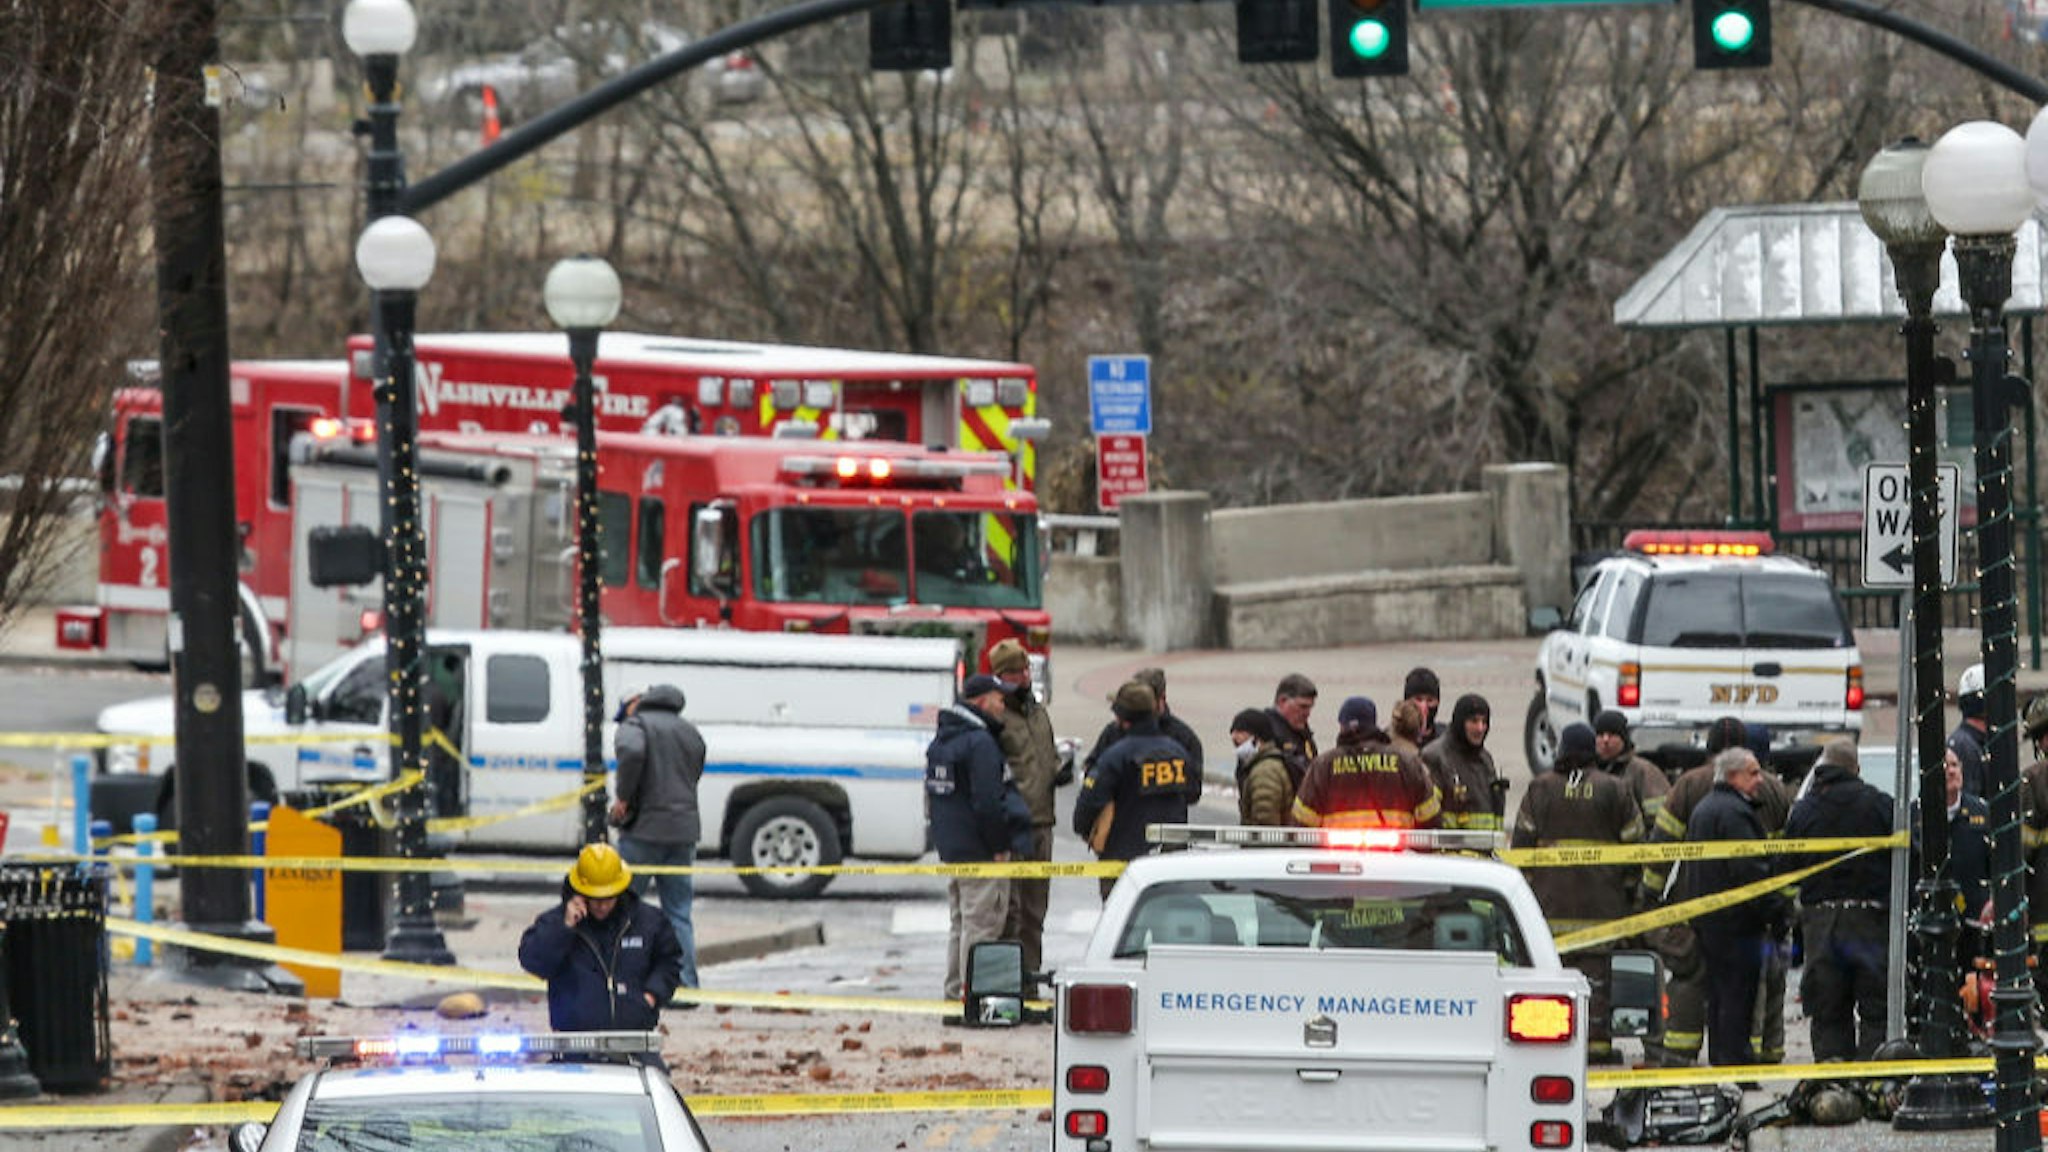 NASHVILLE, TN - DECEMBER 25: FBI and first responders work on the scene after an explosion on December 25, 2020 in Nashville, Tennessee. According to initial reports, a vehicle exploded downtown in the early morning hours